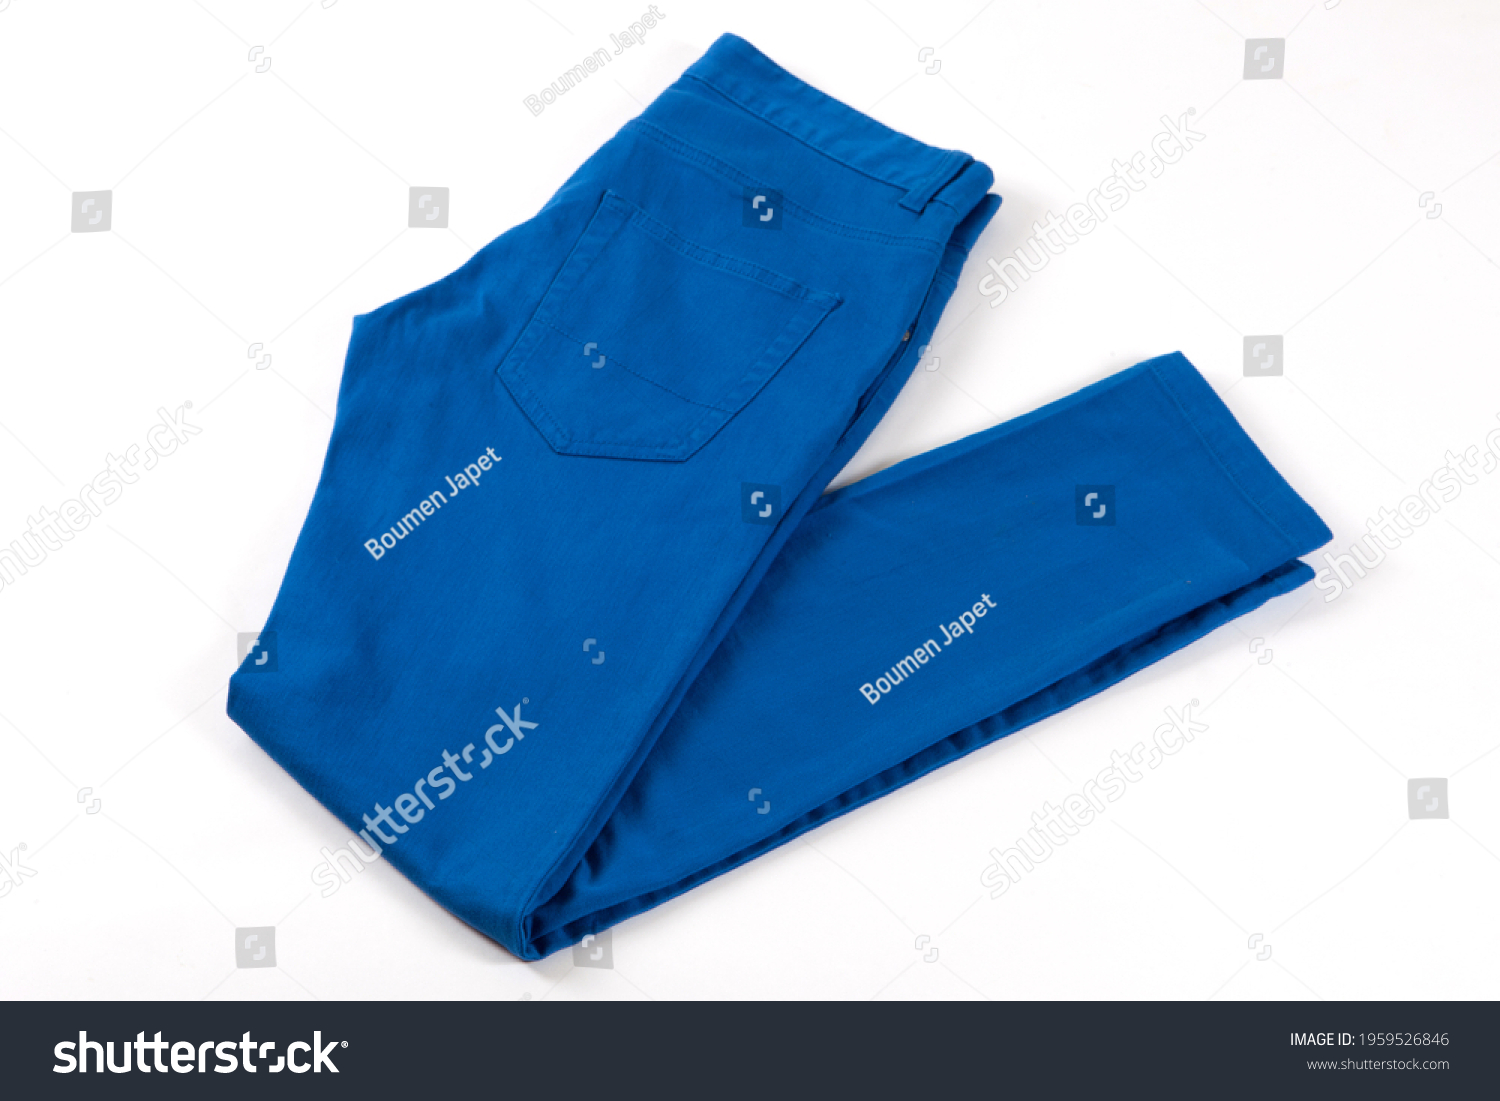 Blue Jeans Isolated On White Background Stock Photo 1959526846 ...